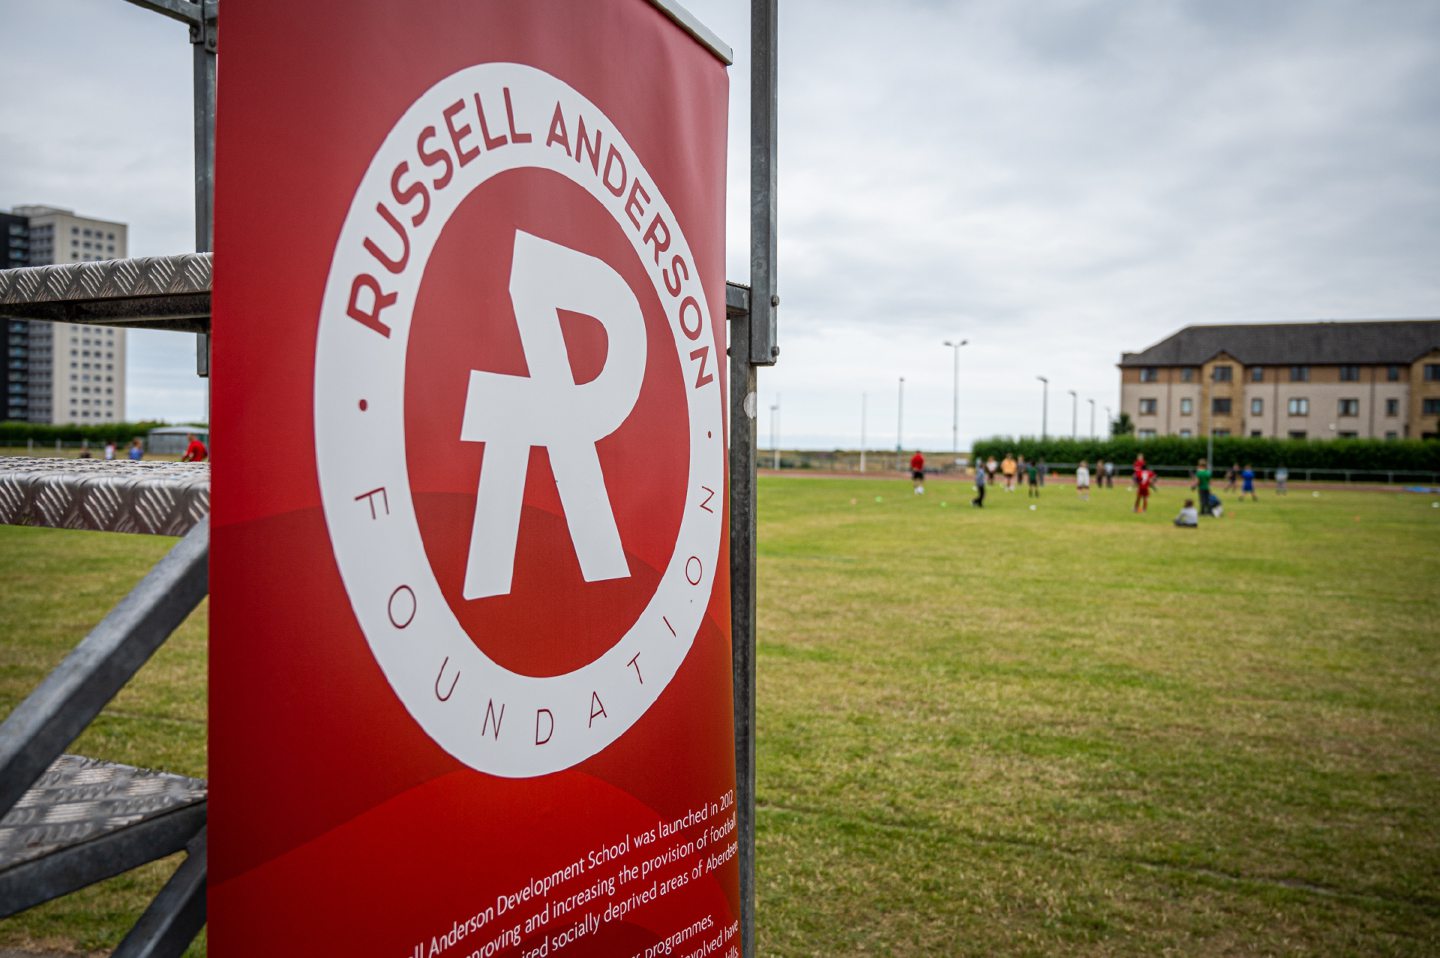 Banner for The Russell Anderson Development School with logo that reads: "Russell Anderson Foundation".